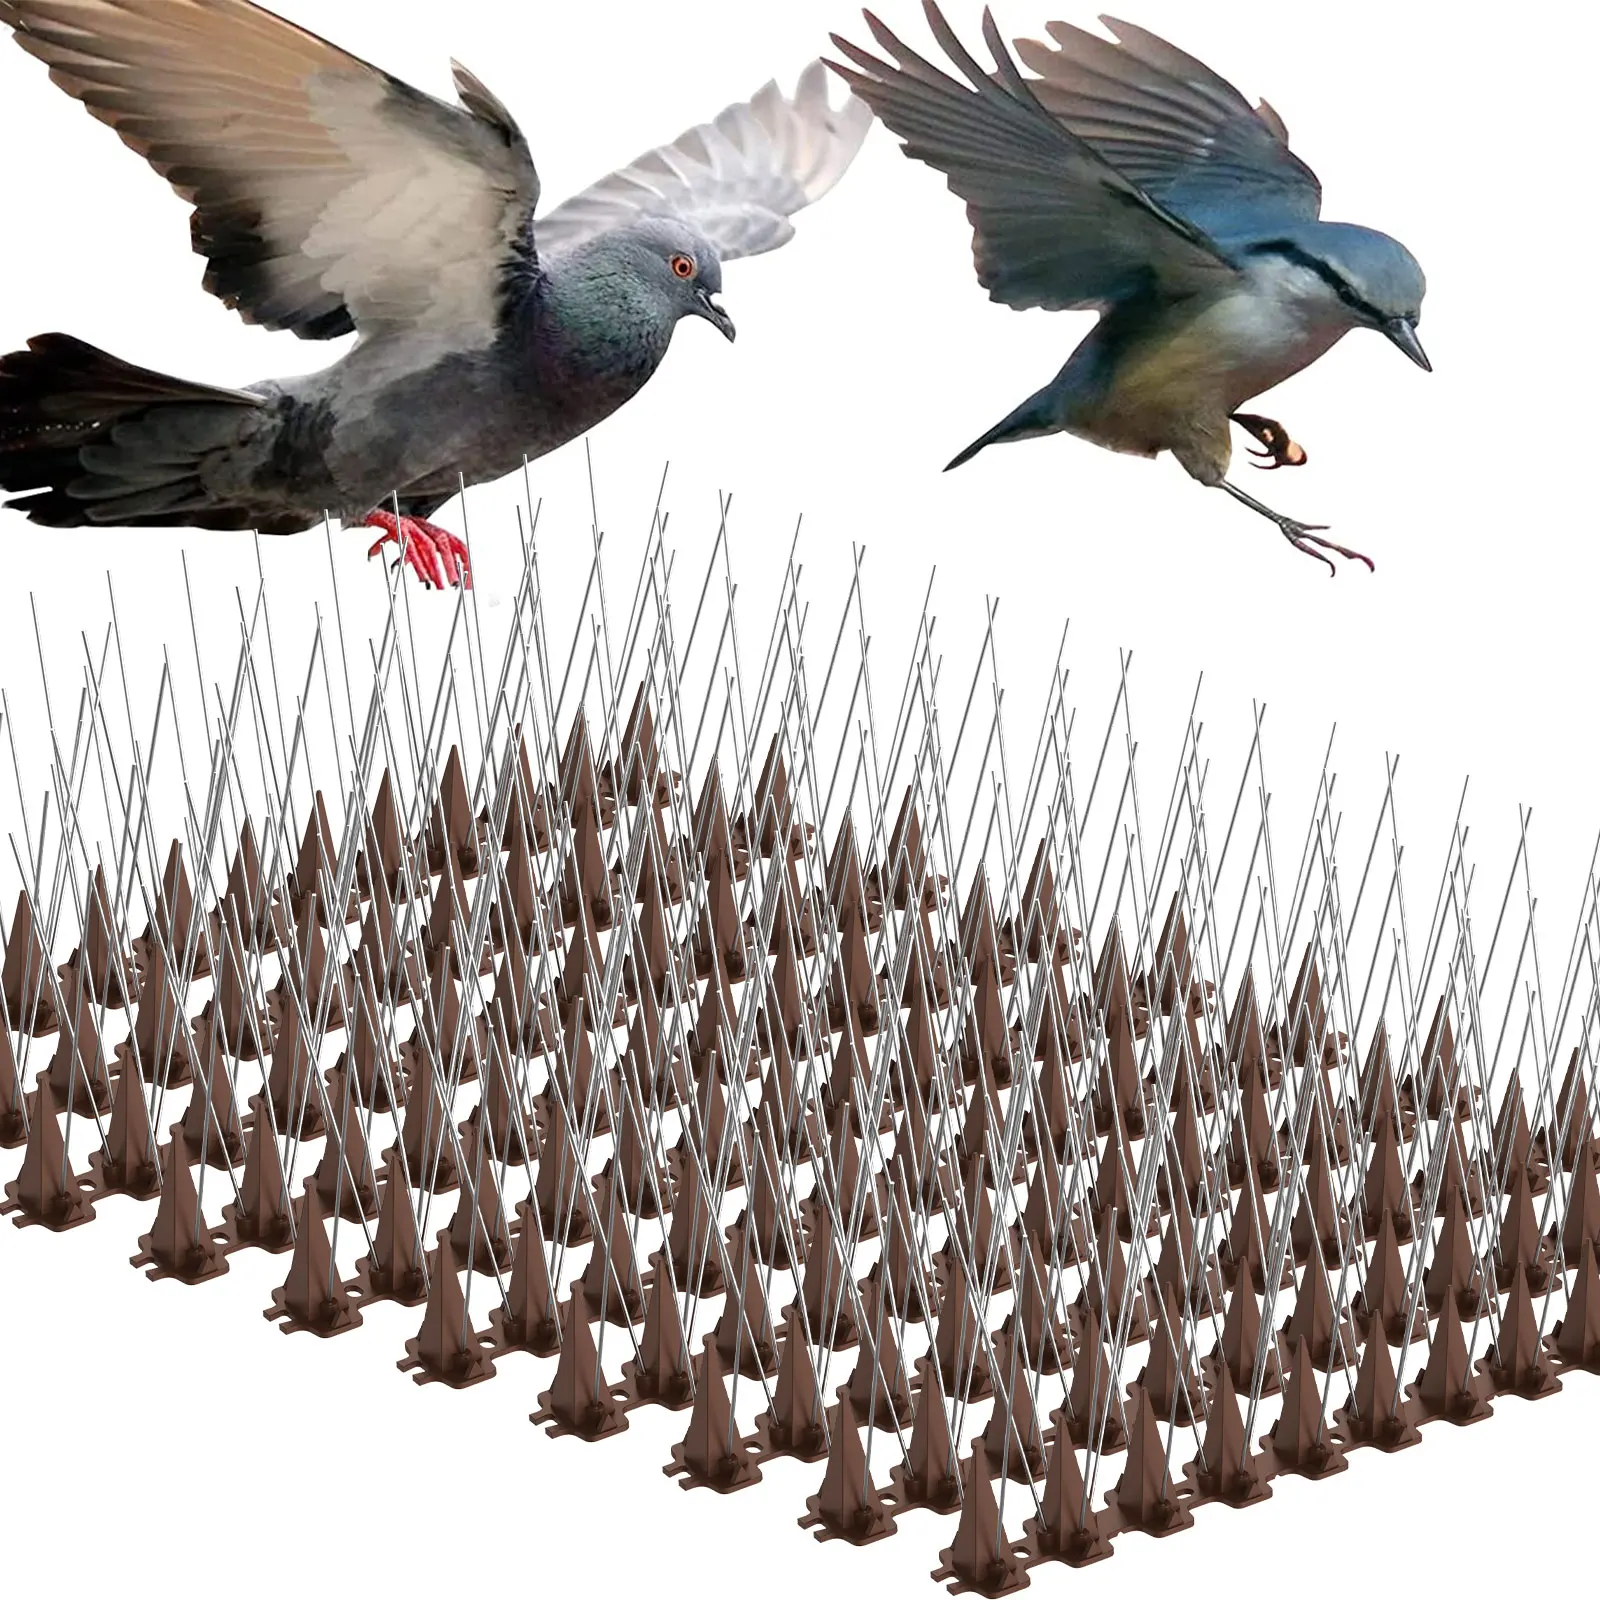 

10pcs Pigeon Spikes Bird Repeller Deterrent Stainless Steel Anti Pigeon Spikes for Fence Roof Birds Squirrel Cats Bird Spikes